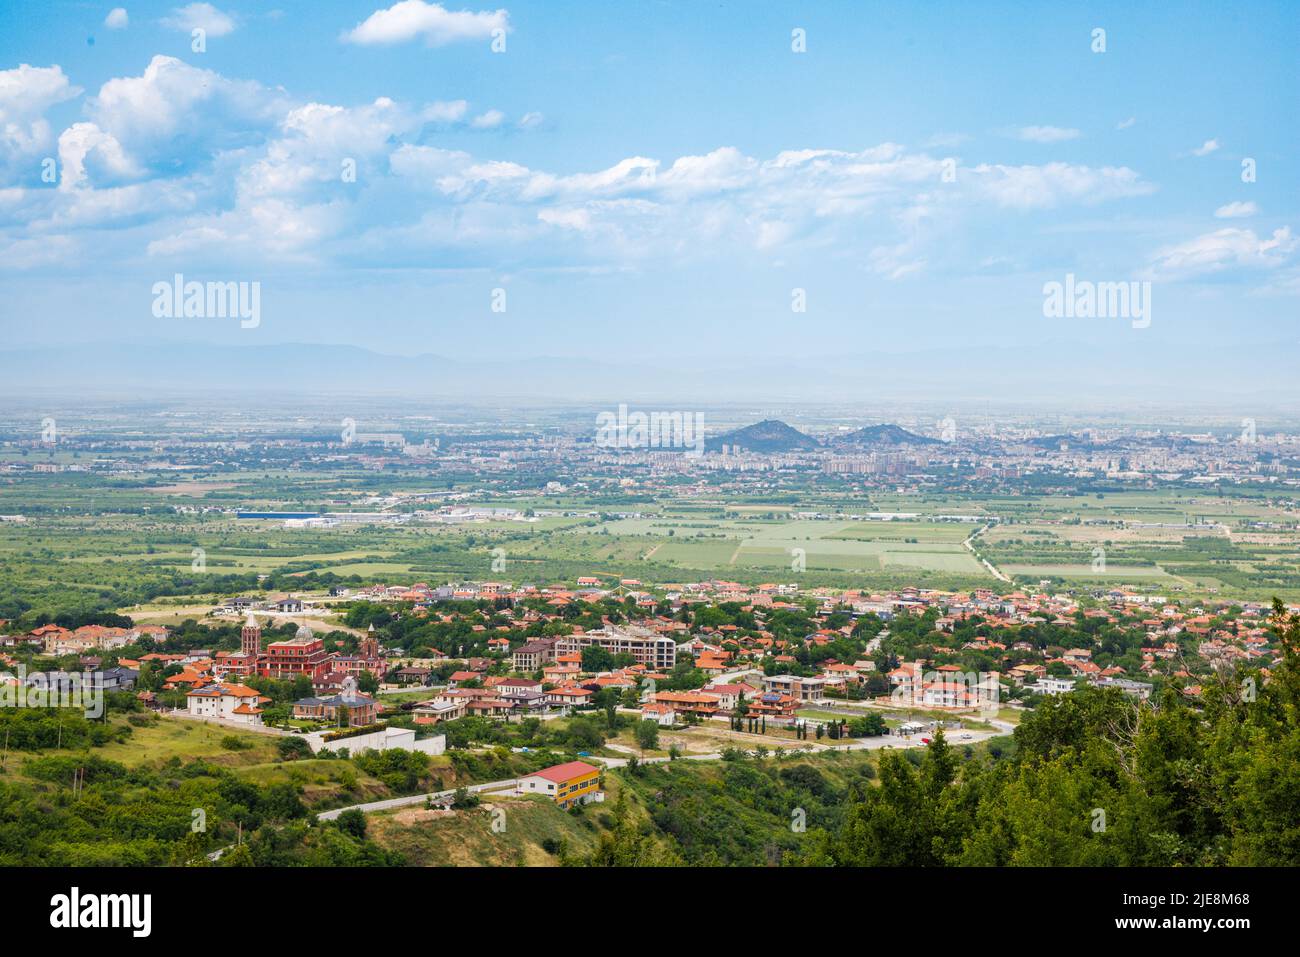 Ancient intermountain town Plovdiv with old residential houses and farm green fields, against backdrop of Rhodope Mountains and hills covered with eve Stock Photo